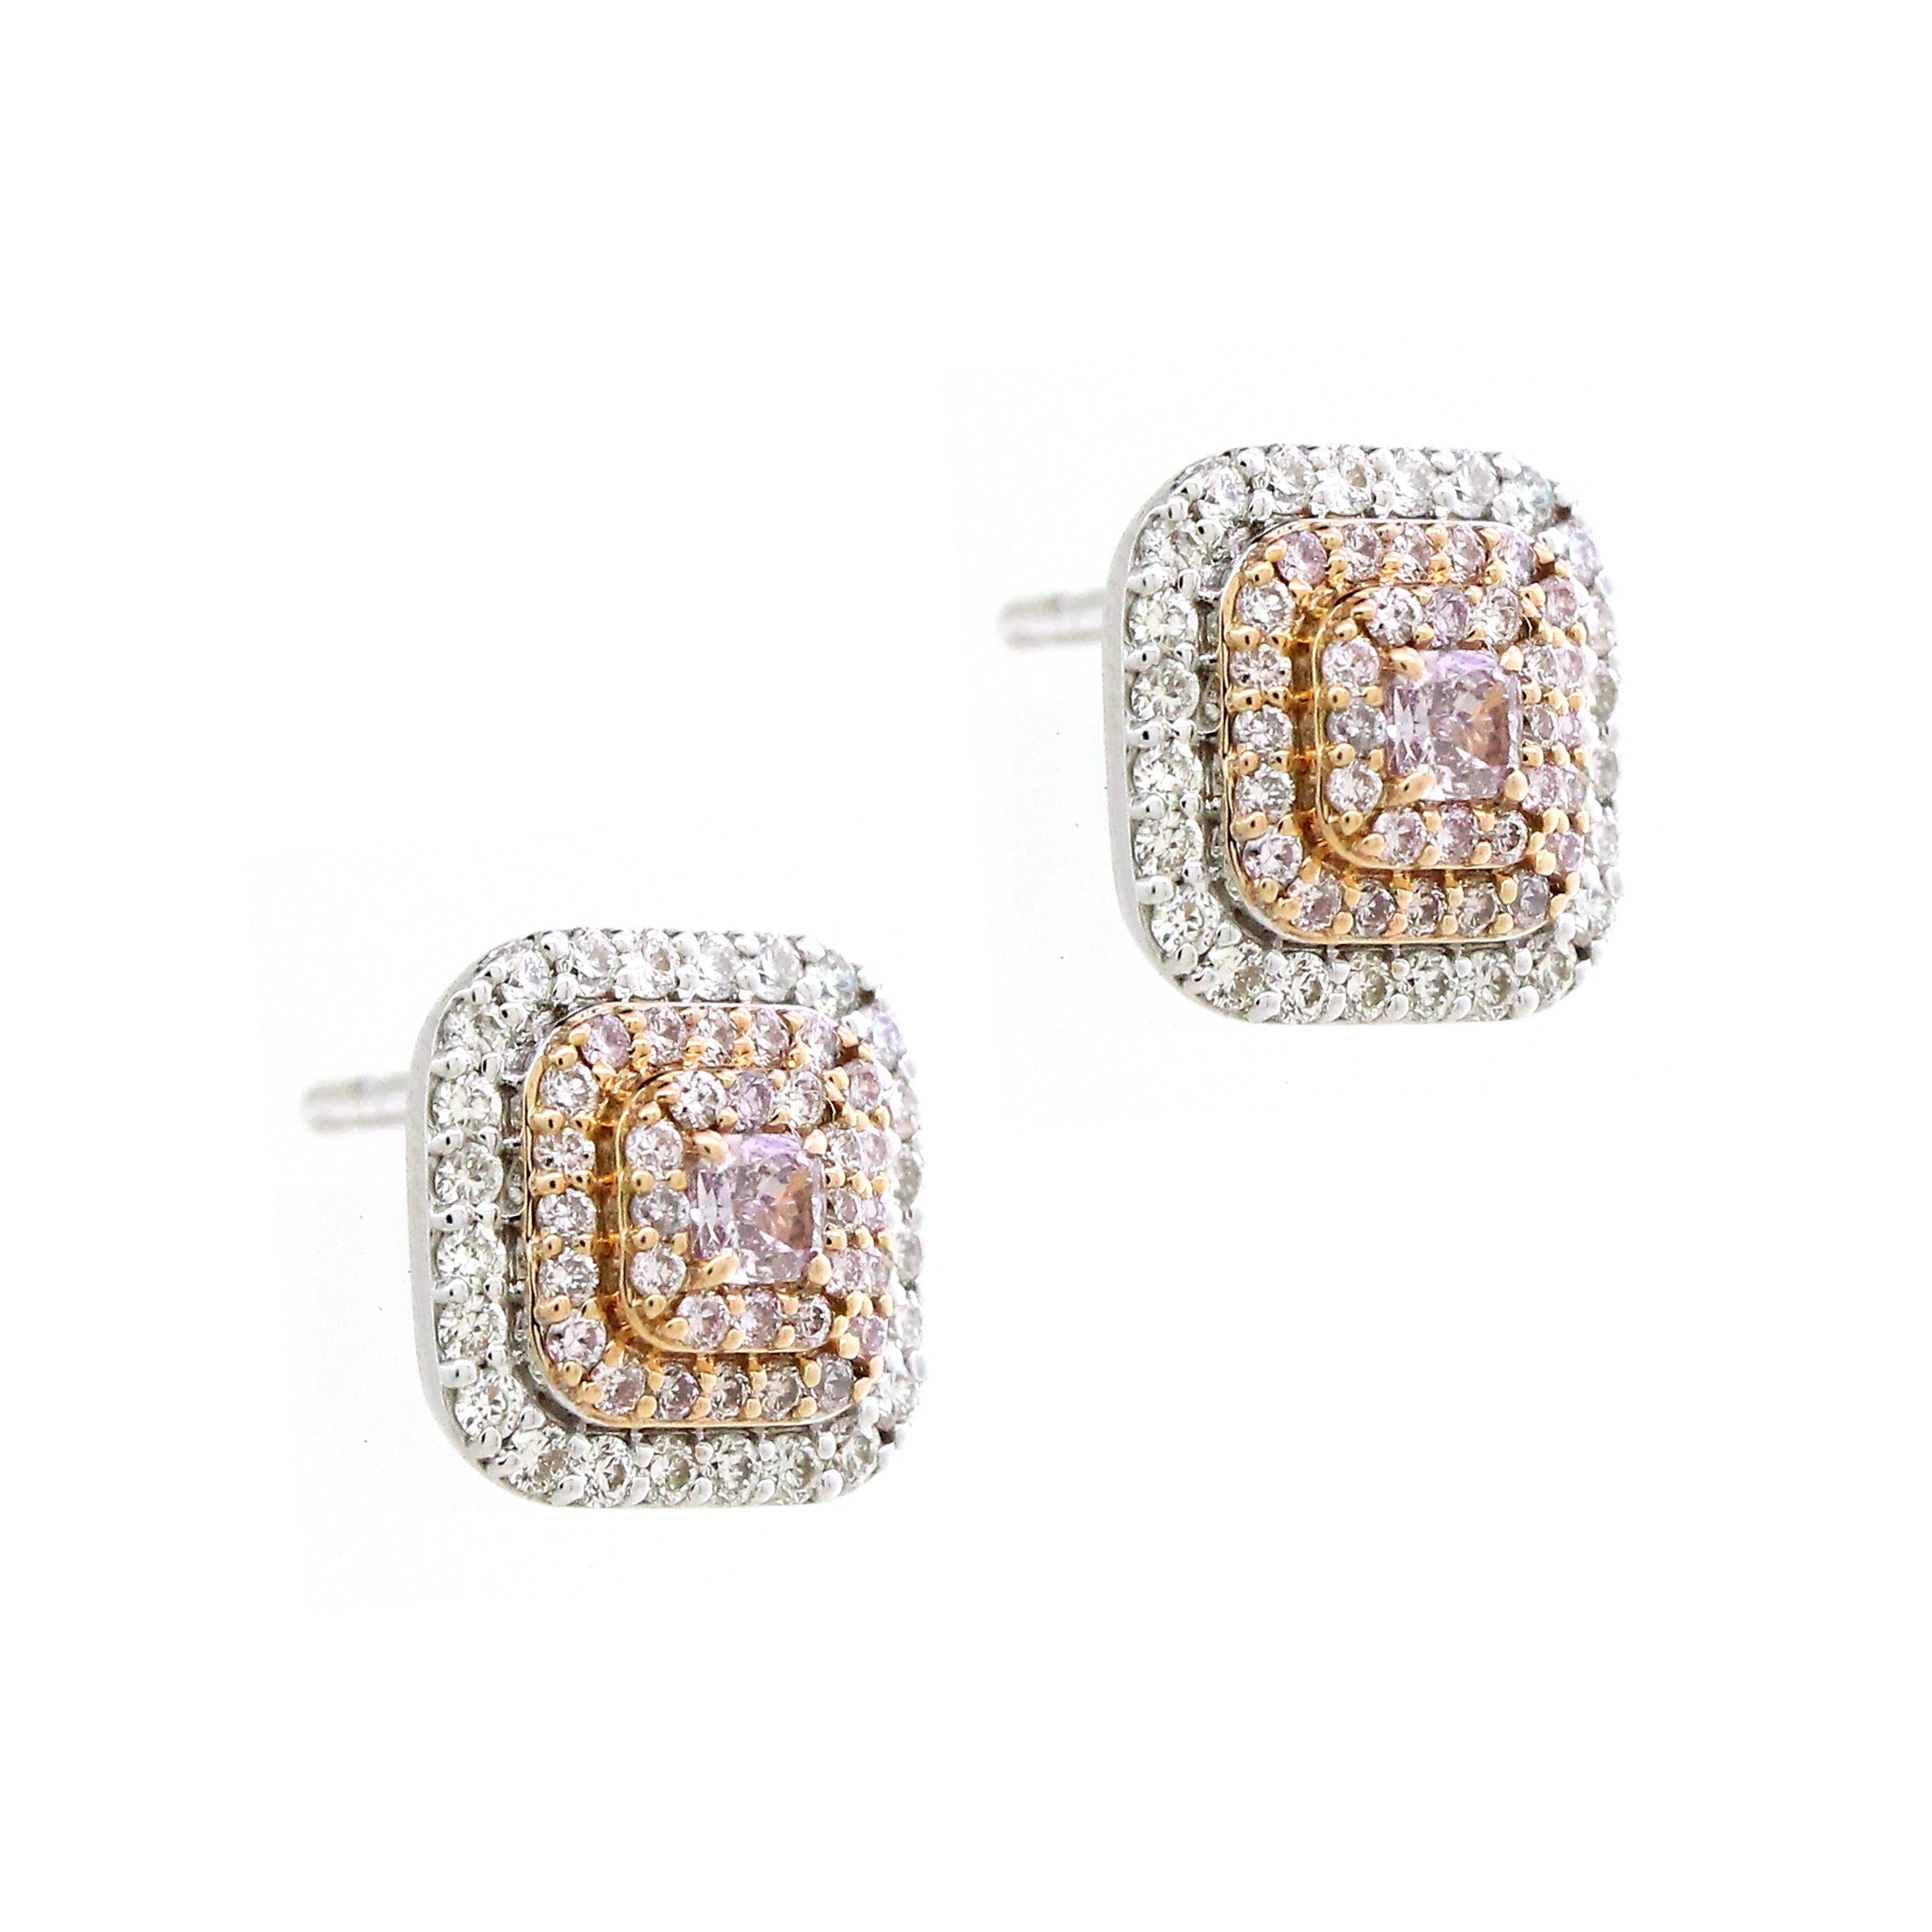 Each earring boasts a central cushion-shaped pink diamond, with a combined weight of 0.2 carats. 
Surrounding each cushion pink diamond is a dazzling halo of 64 round pink diamonds, totaling 0.31 carats. 
The outer halo comprises 48 round white